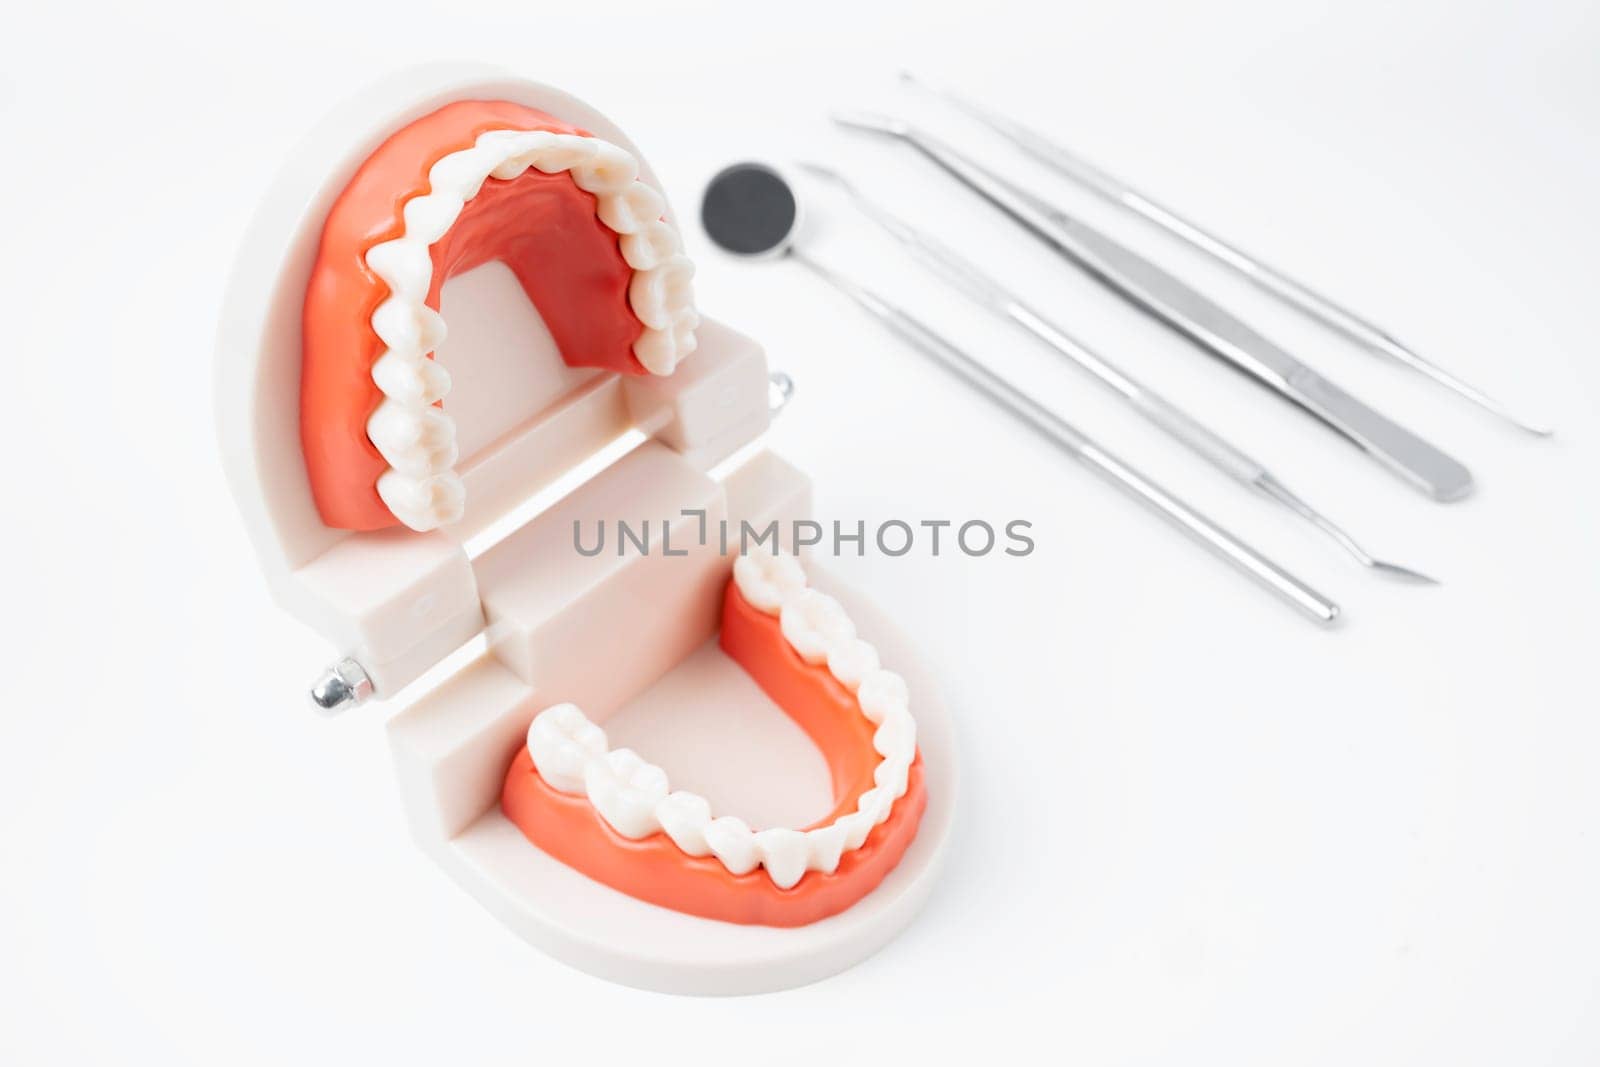 The Anatomical teeth model and dental tools on white background. by Gamjai